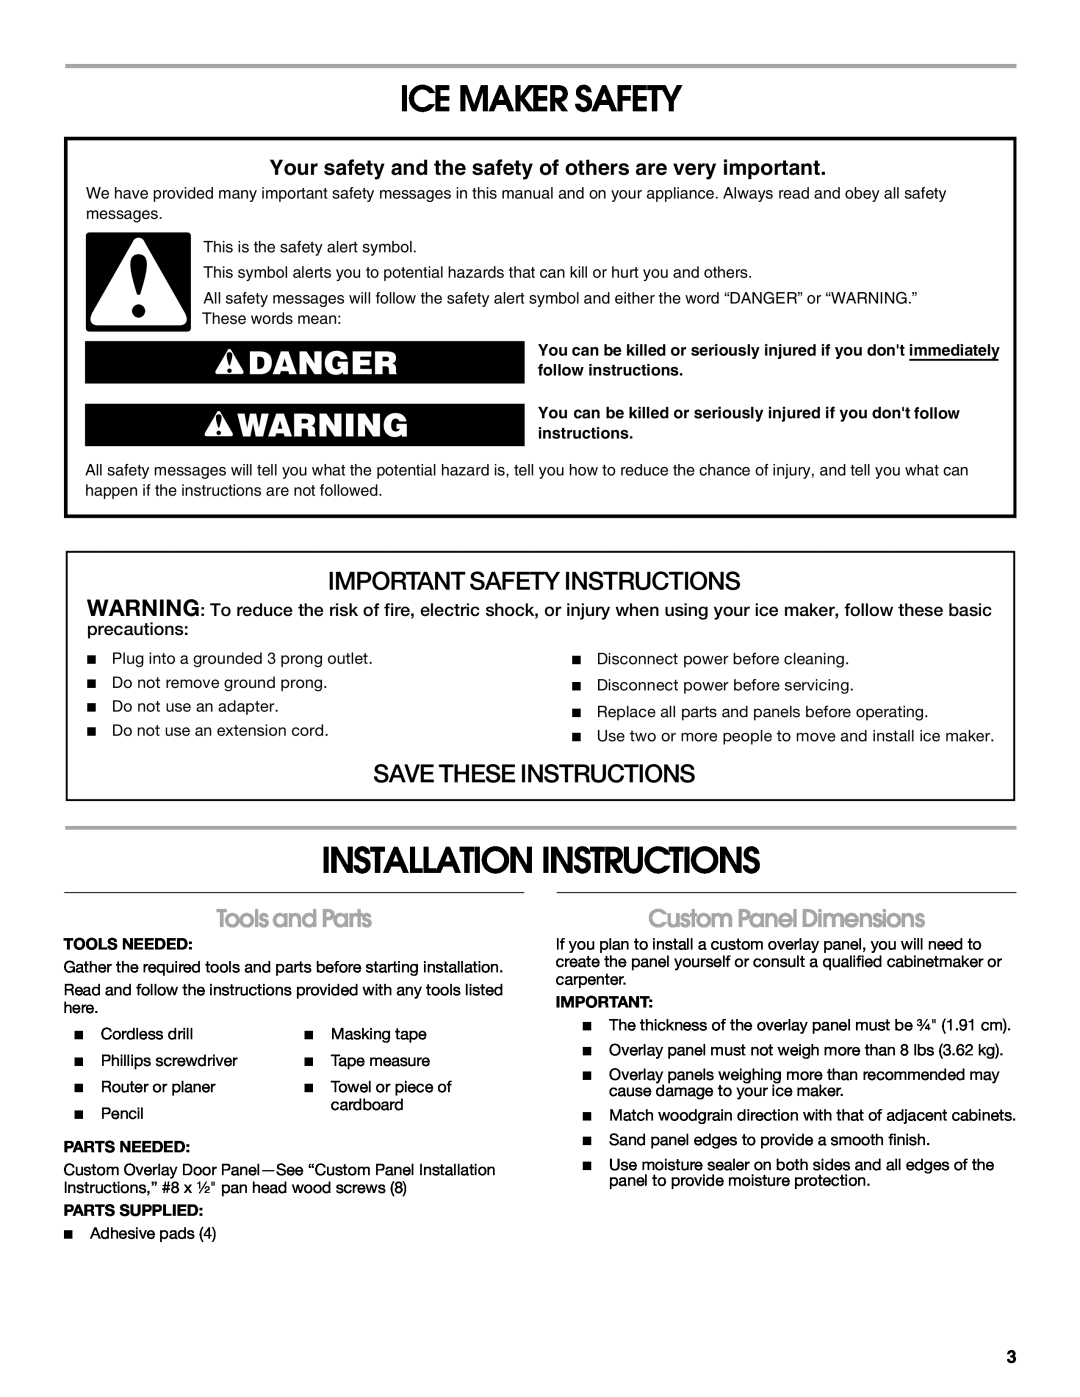 Jenn-Air W10136129C Ice Maker Safety, Installation Instructions, Danger, Important Safety Instructions, Tools and Parts 